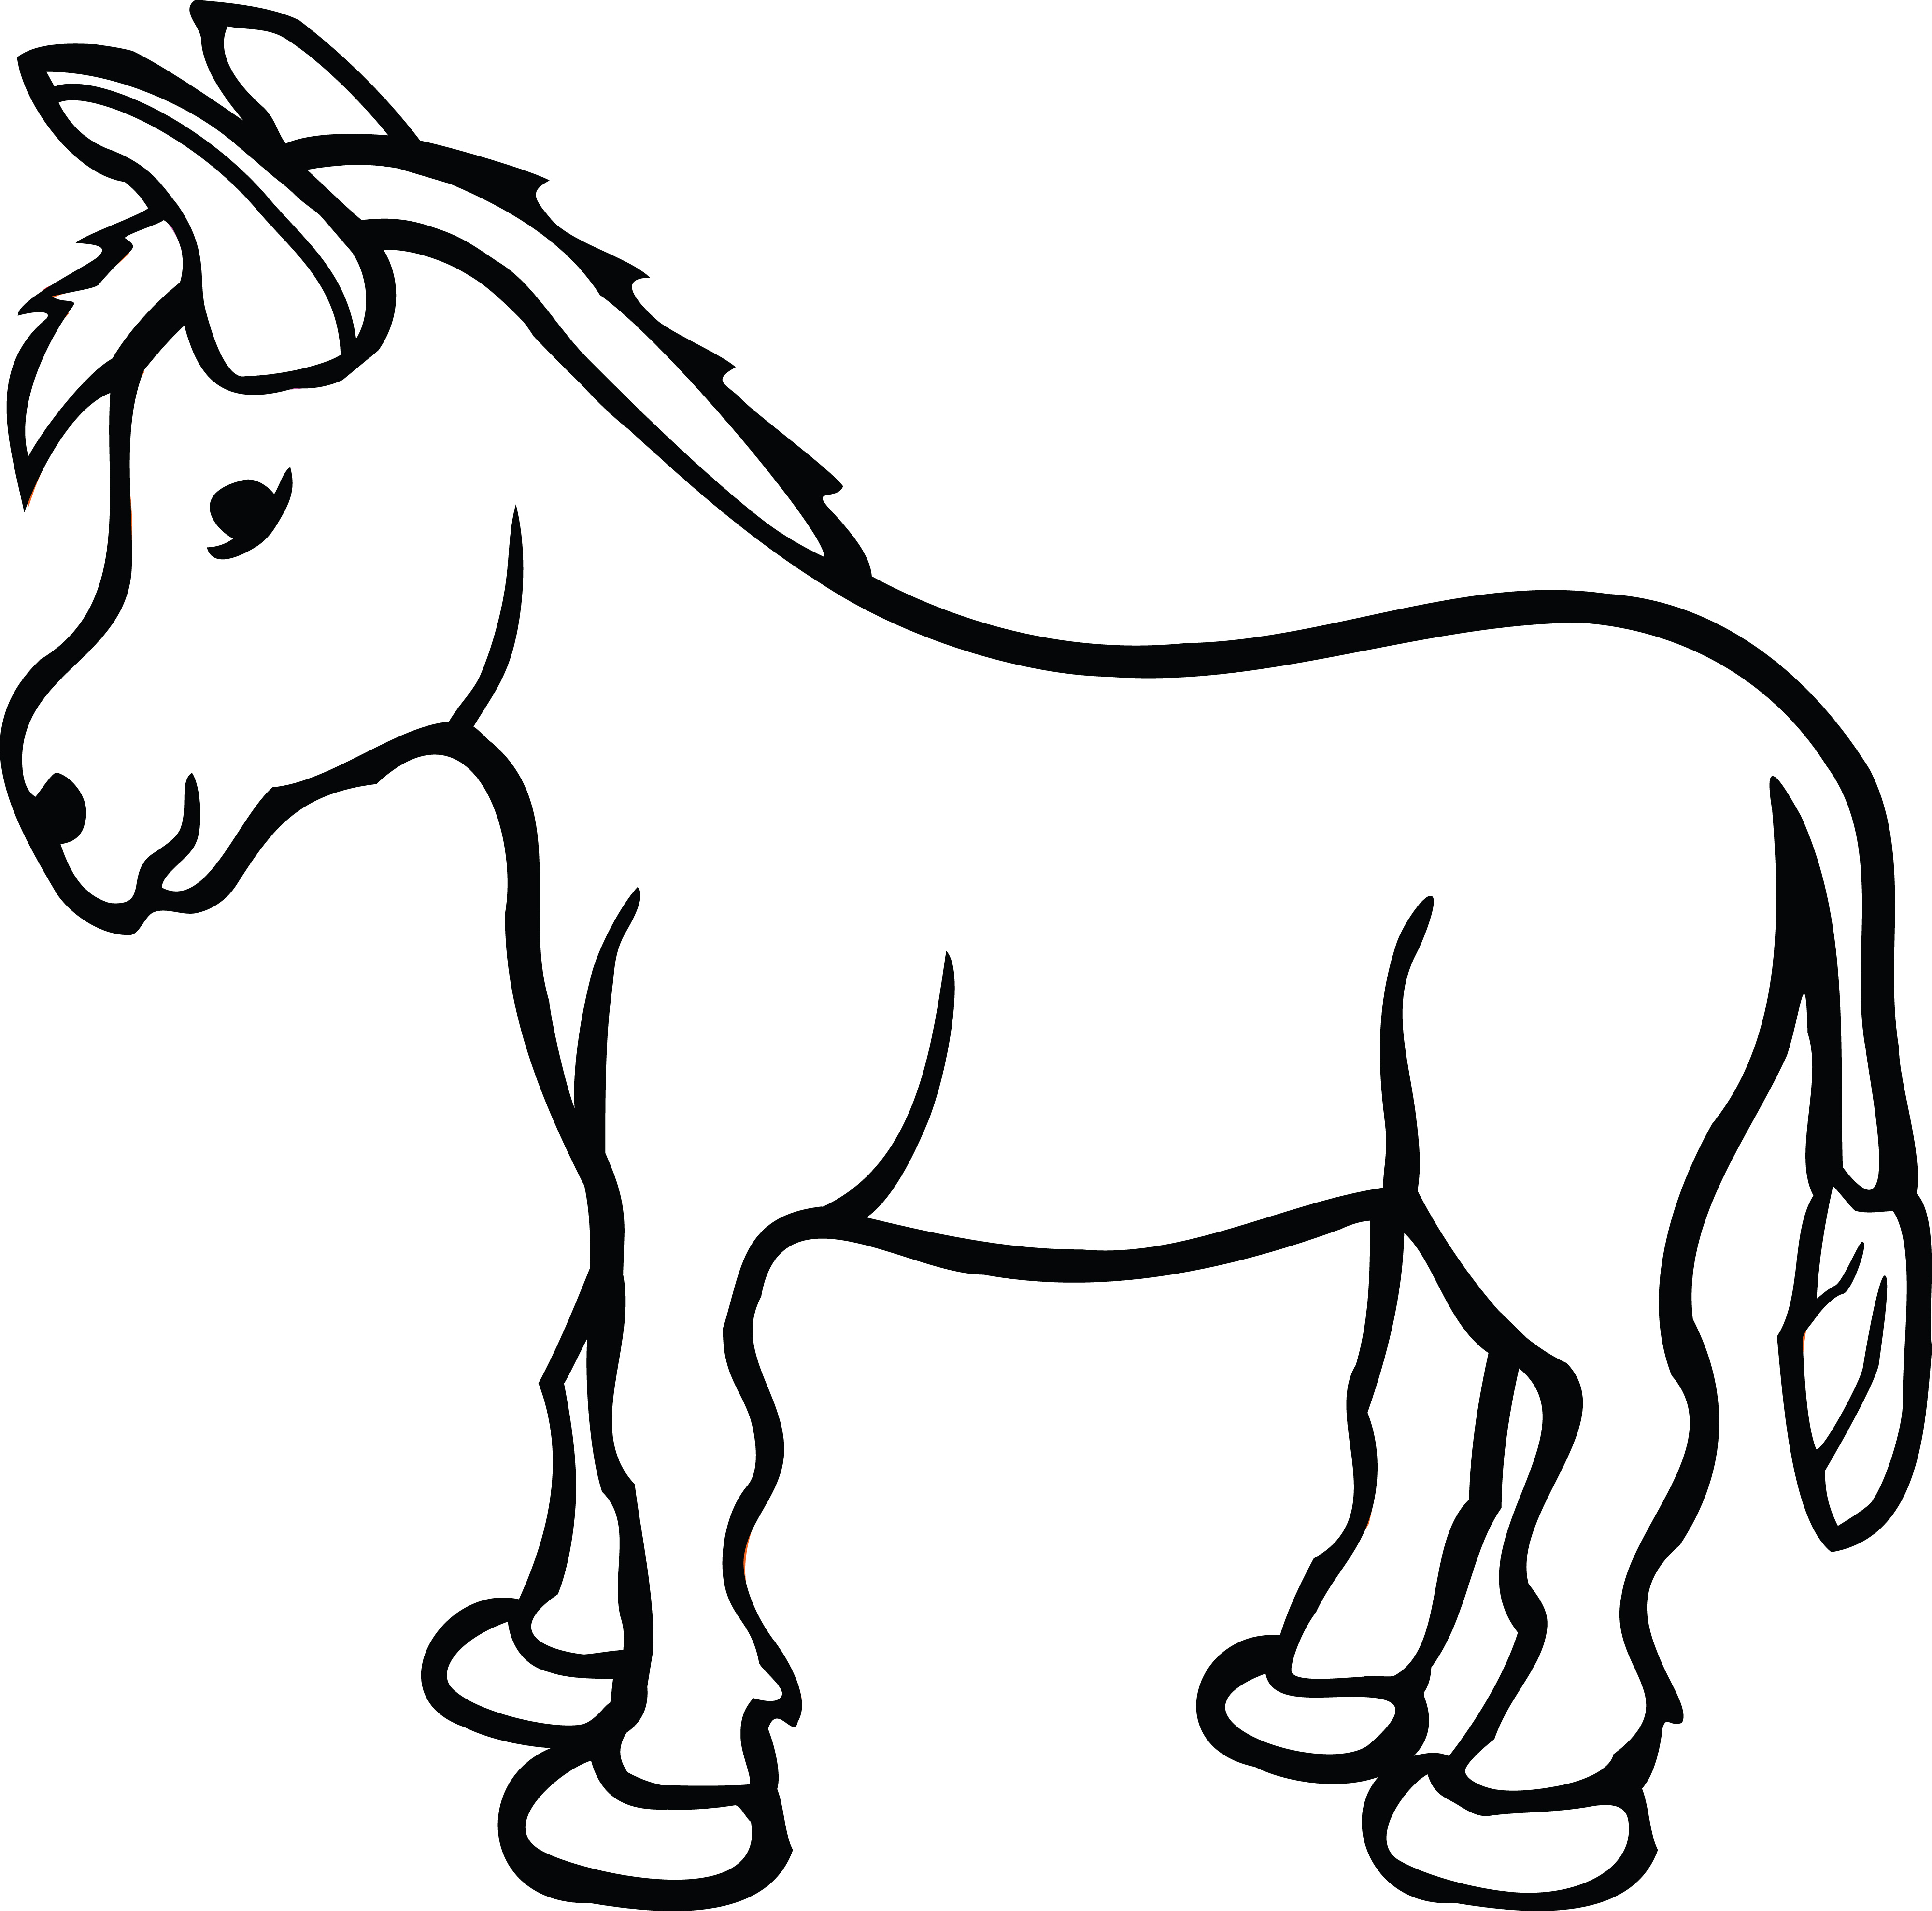 Donkey clipart drawn. Free download best 